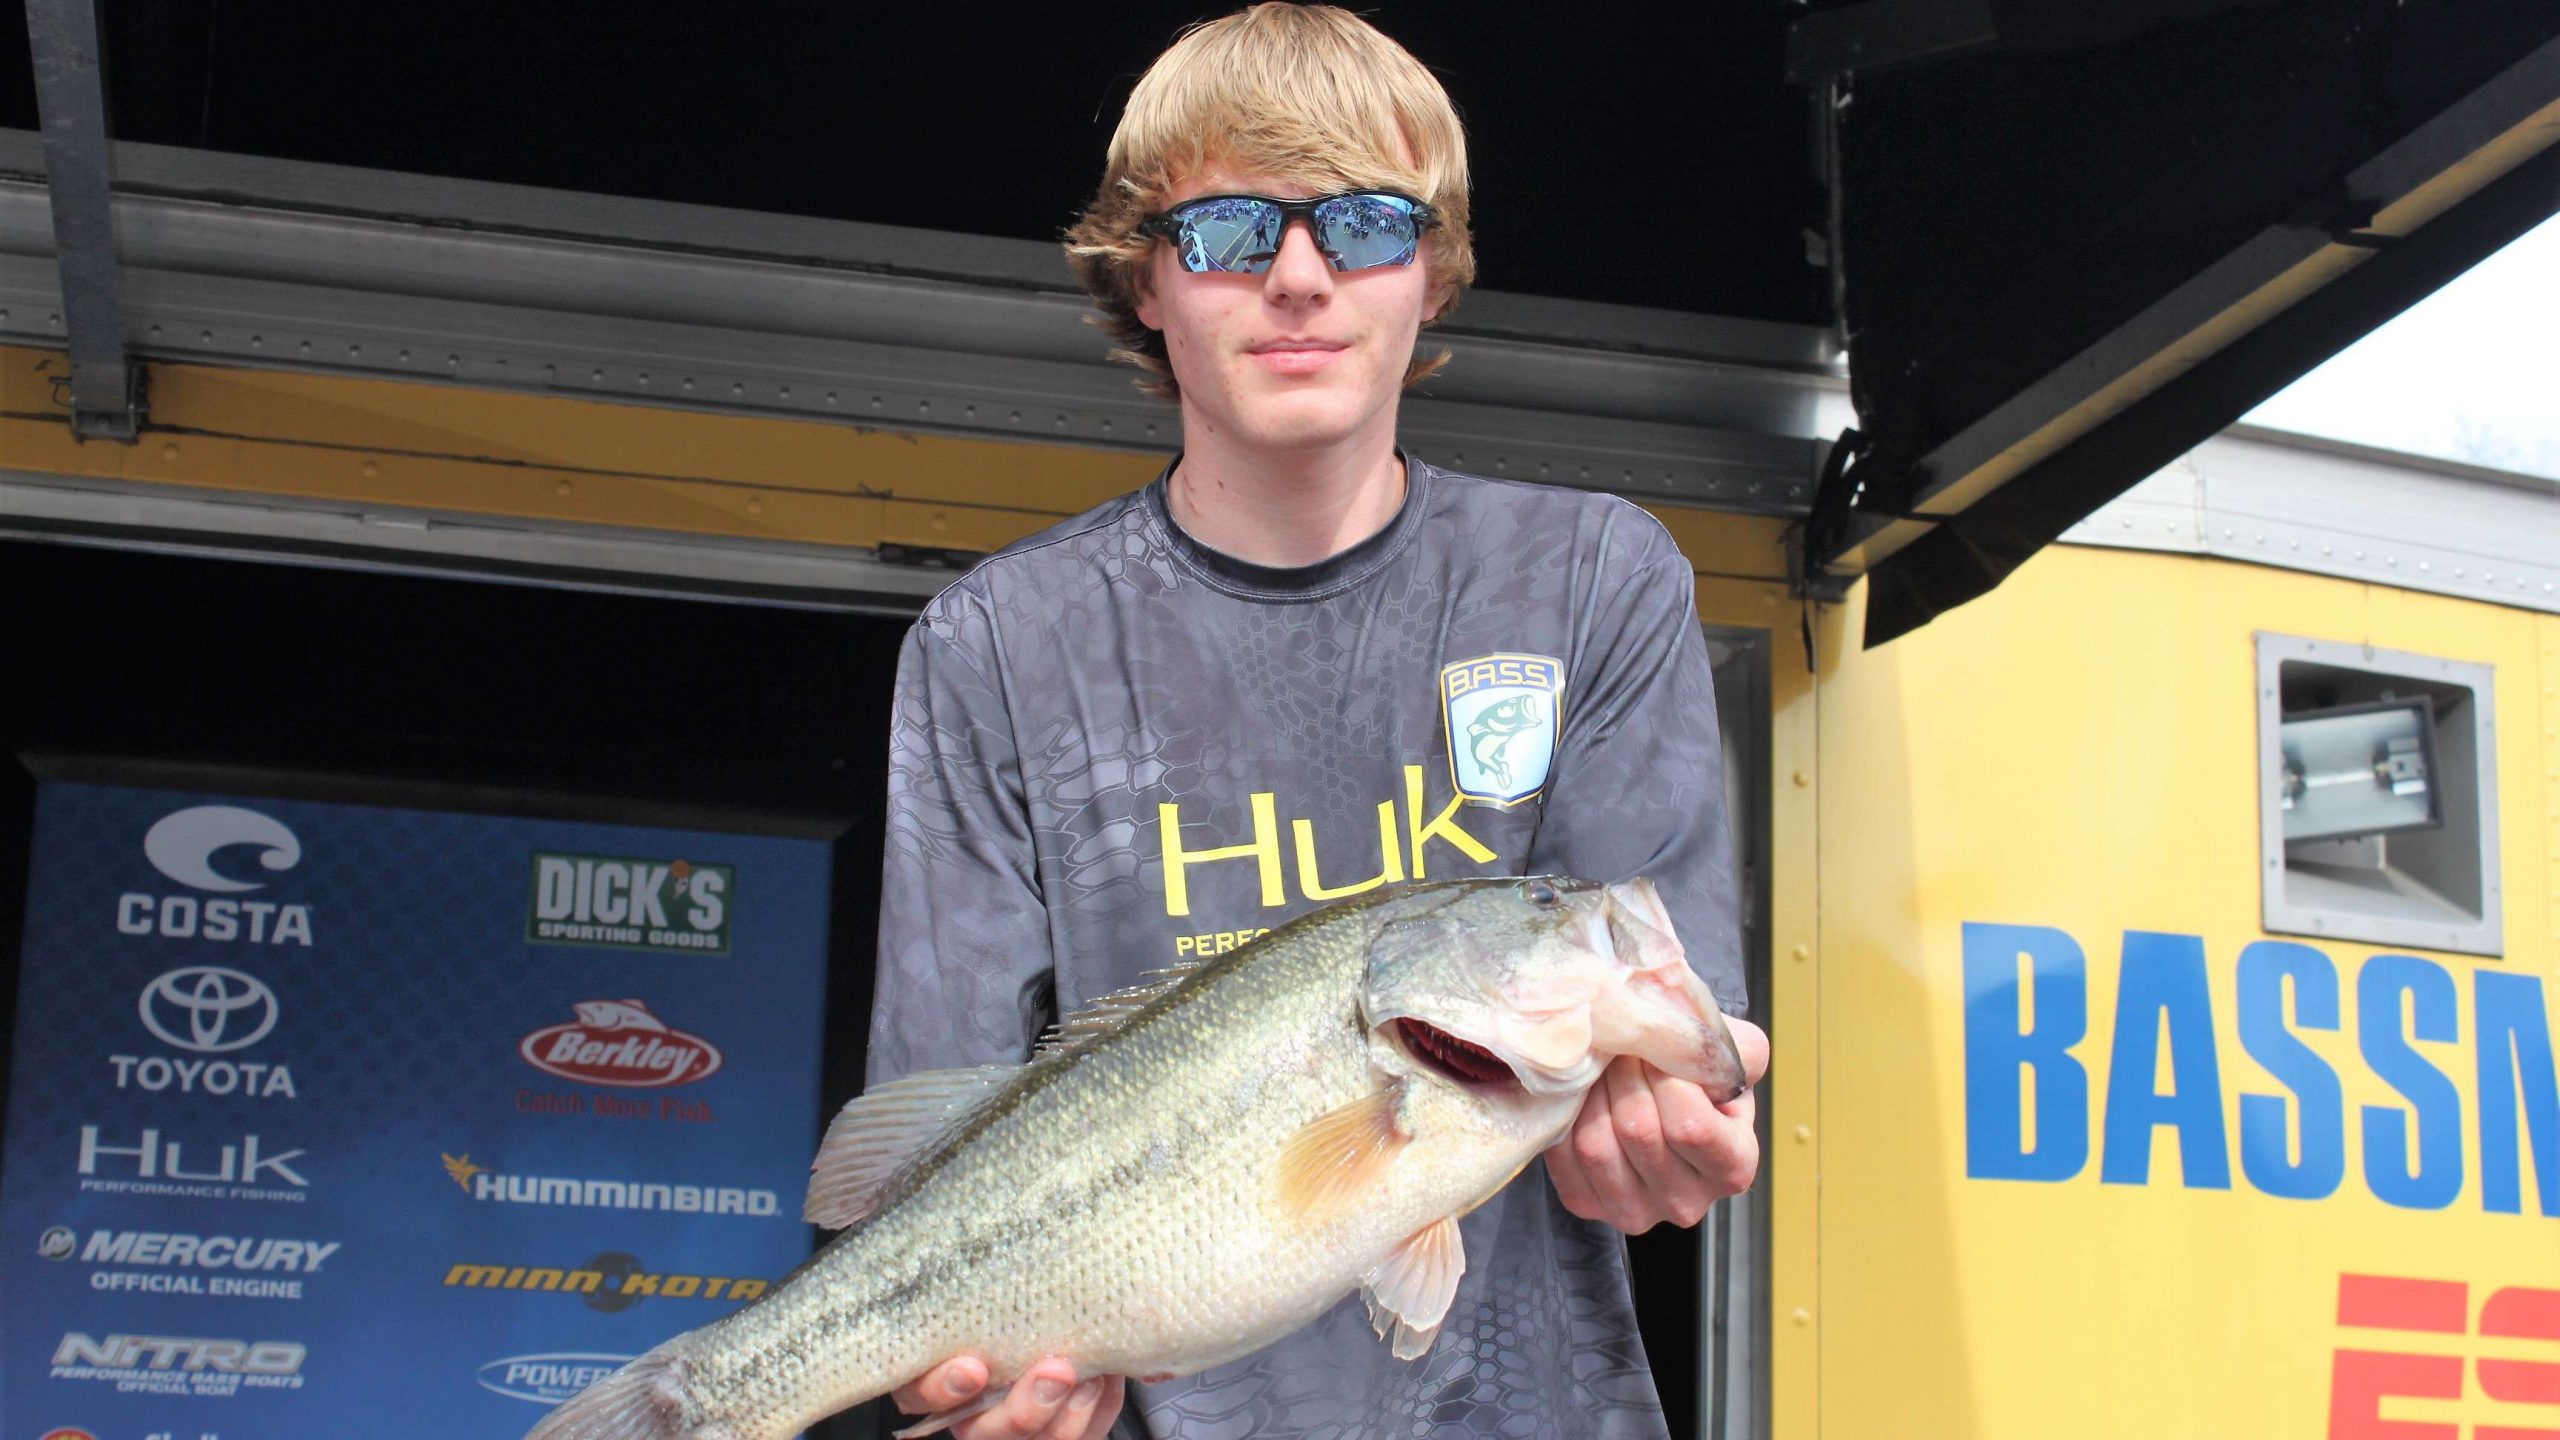 Tyler Hamburger fished alone on Sunday, but he brought the biggest bass to the scales. The young angler from the Northeastern Oklahoma High School Bass Club caught this 6-2 beauty and was eager to show it to the crowd.